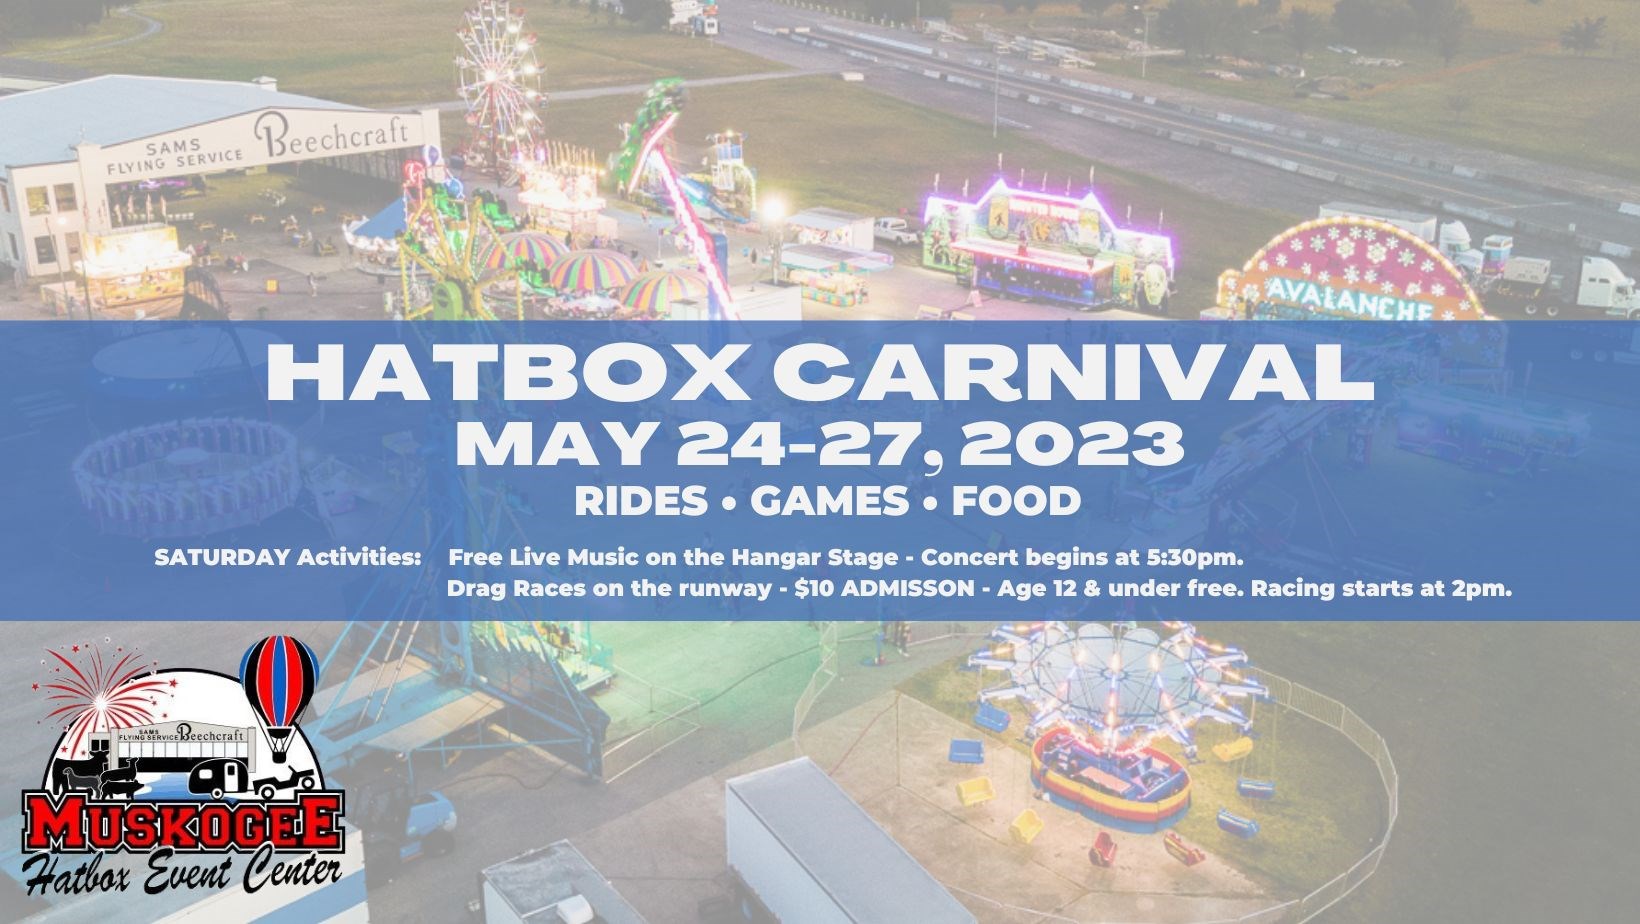 Hatbox Carnival Flyer (2) updated